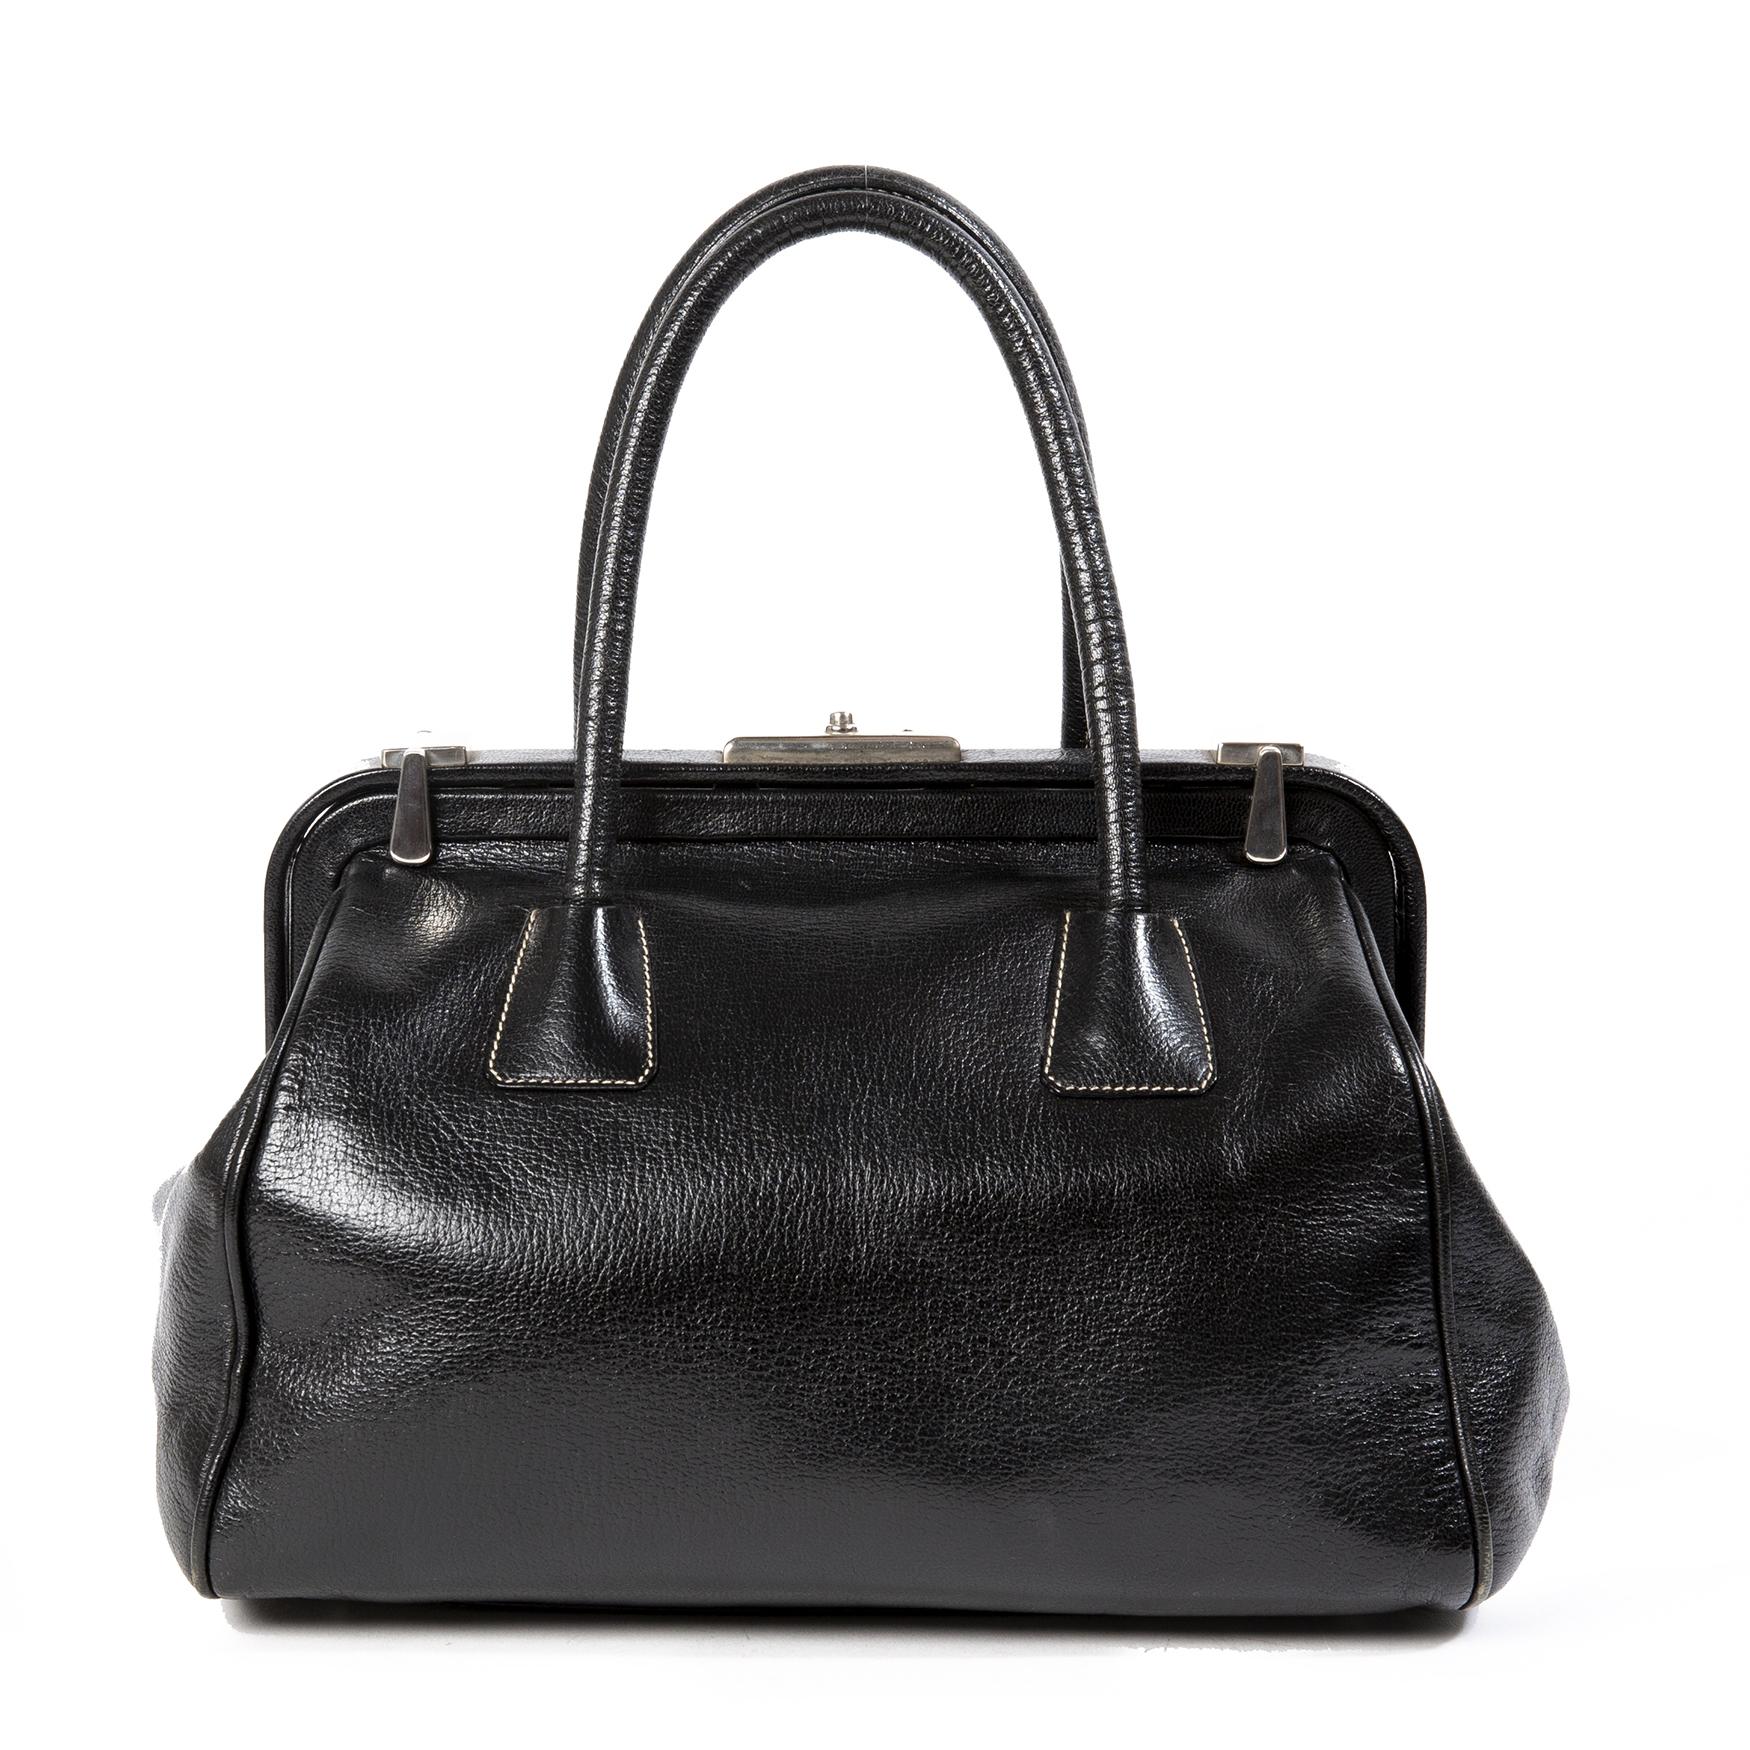 Good condition

Prada Black Doctor's Bag

This gorgeous Prada bag is crafted from black leather and features two rolled top handles.
It has a doctor's bag shape and silver-tone hardware. The interior is fabric lined and features one zip pocket.
